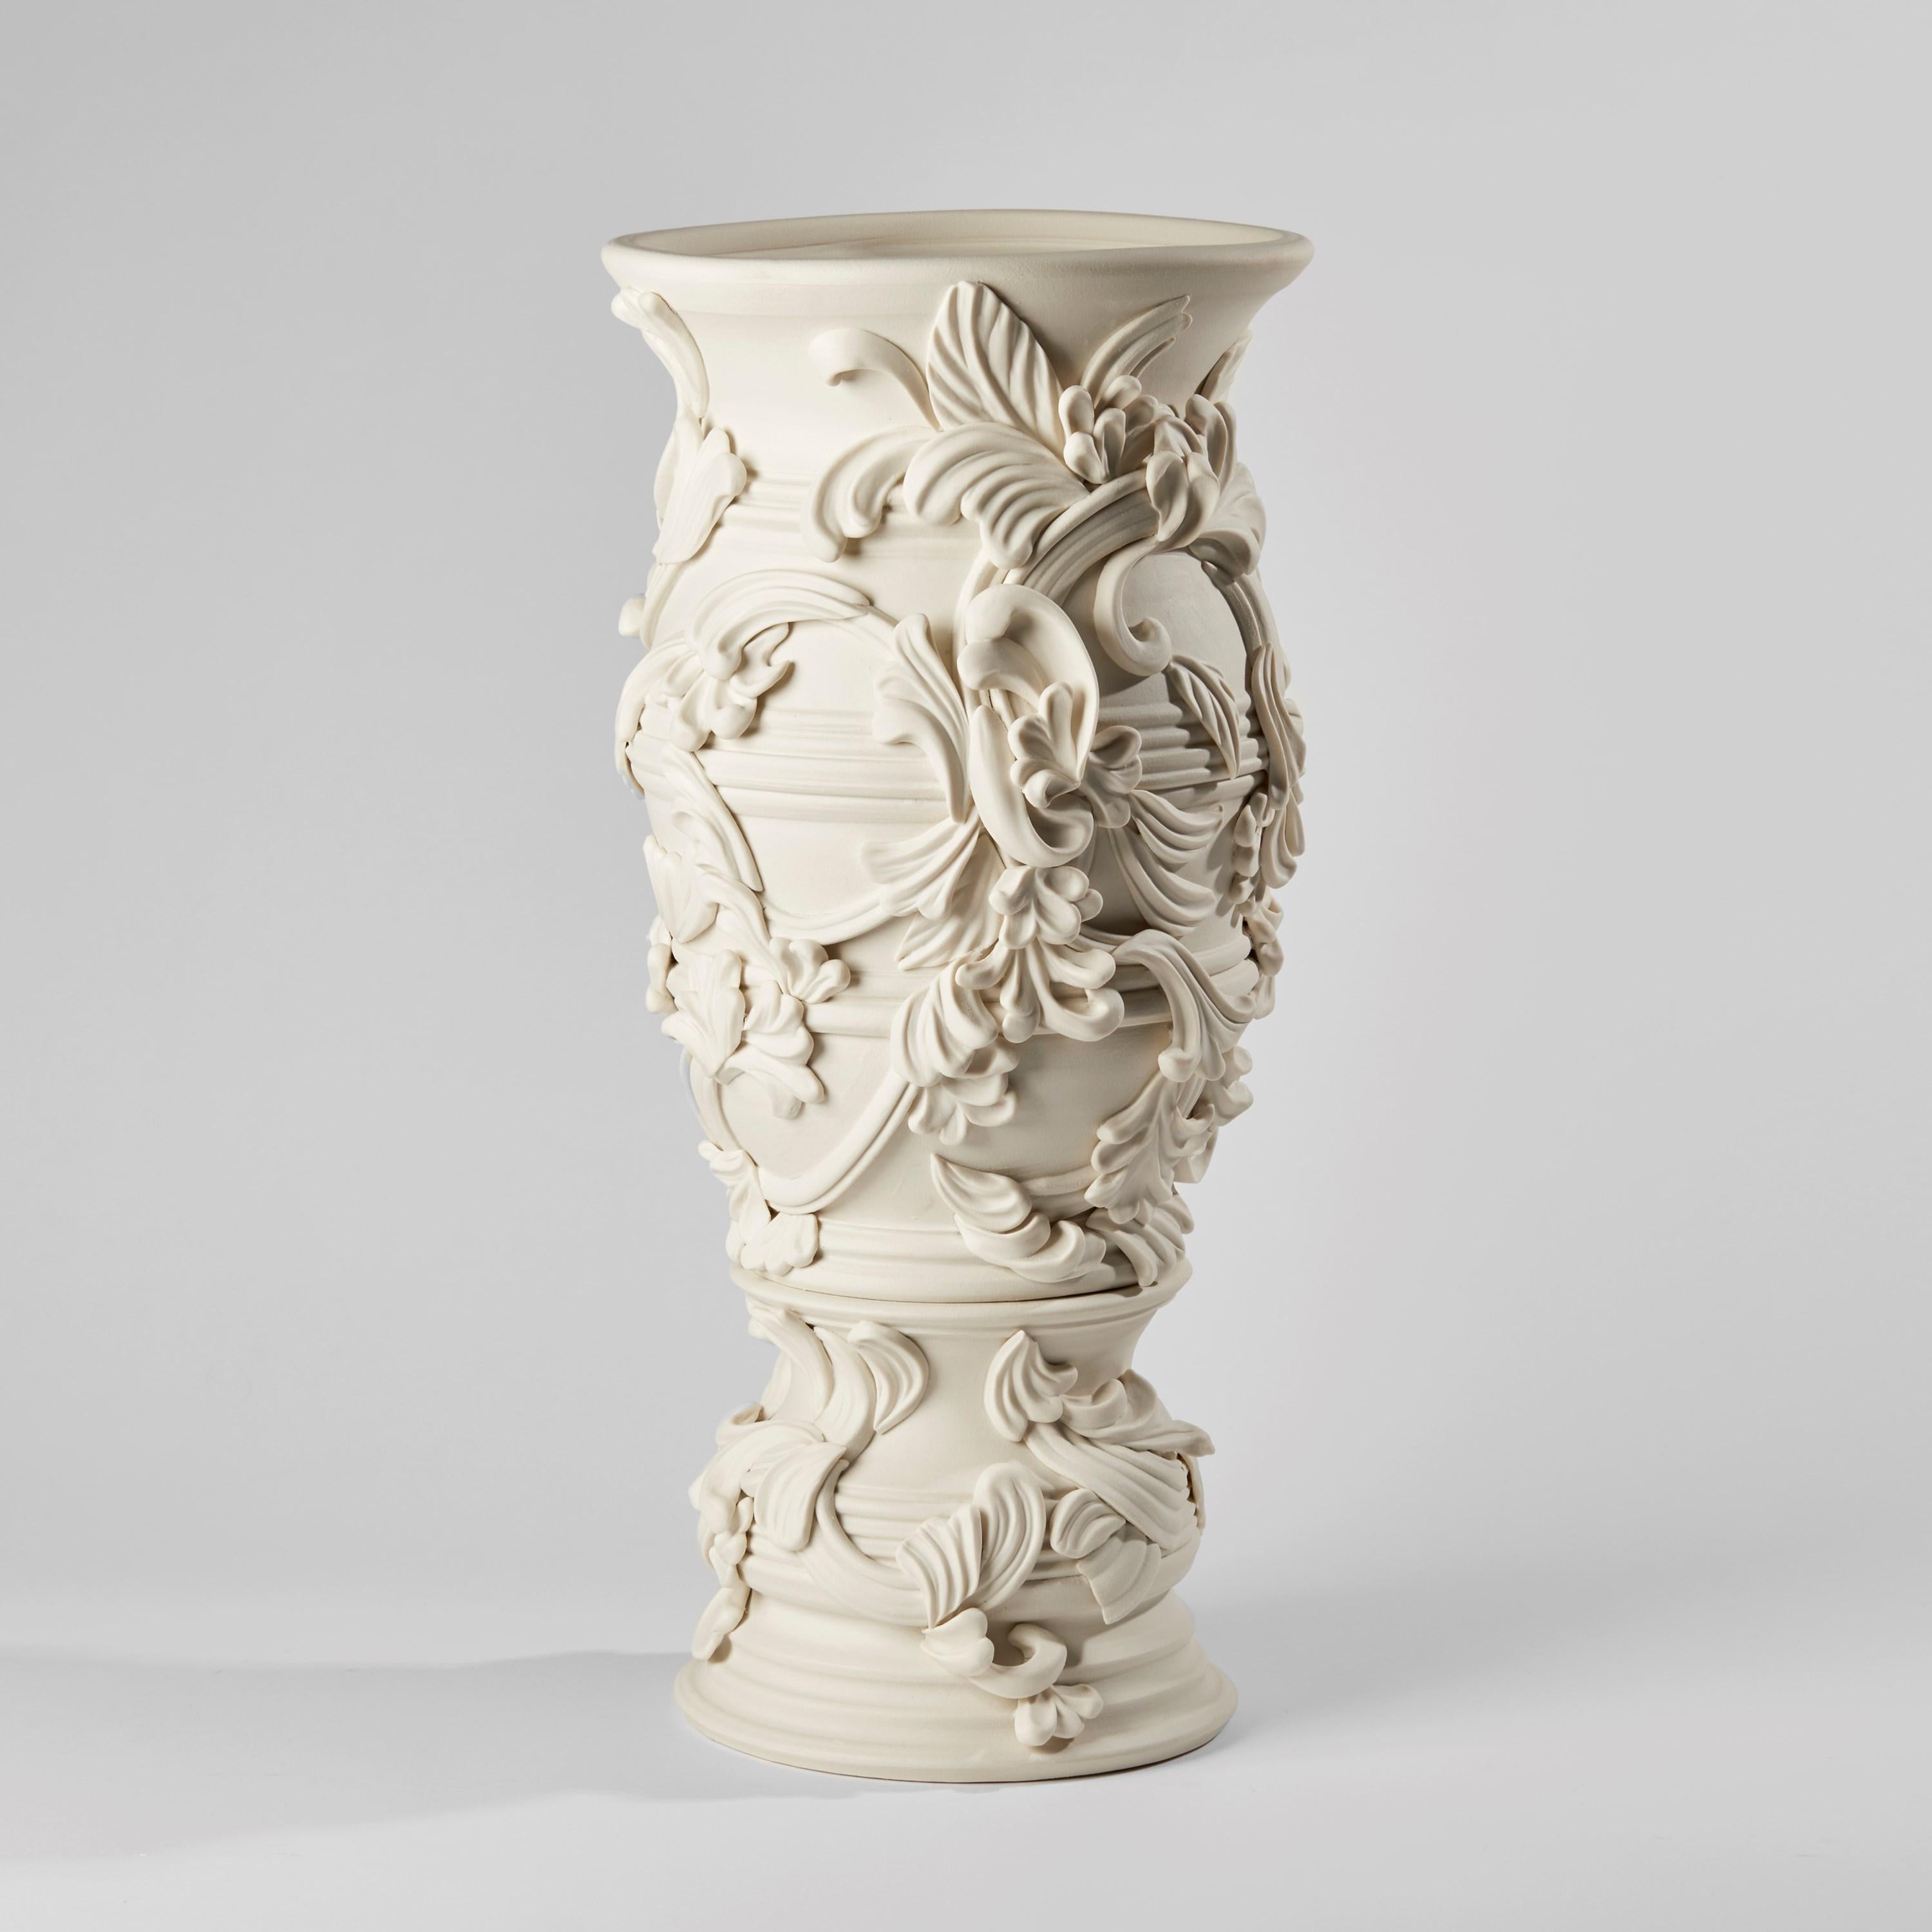 Organic Modern Promenade IV, a Unique Ceramic Sculptural Tall Vase in Porcelain by Jo Taylor For Sale